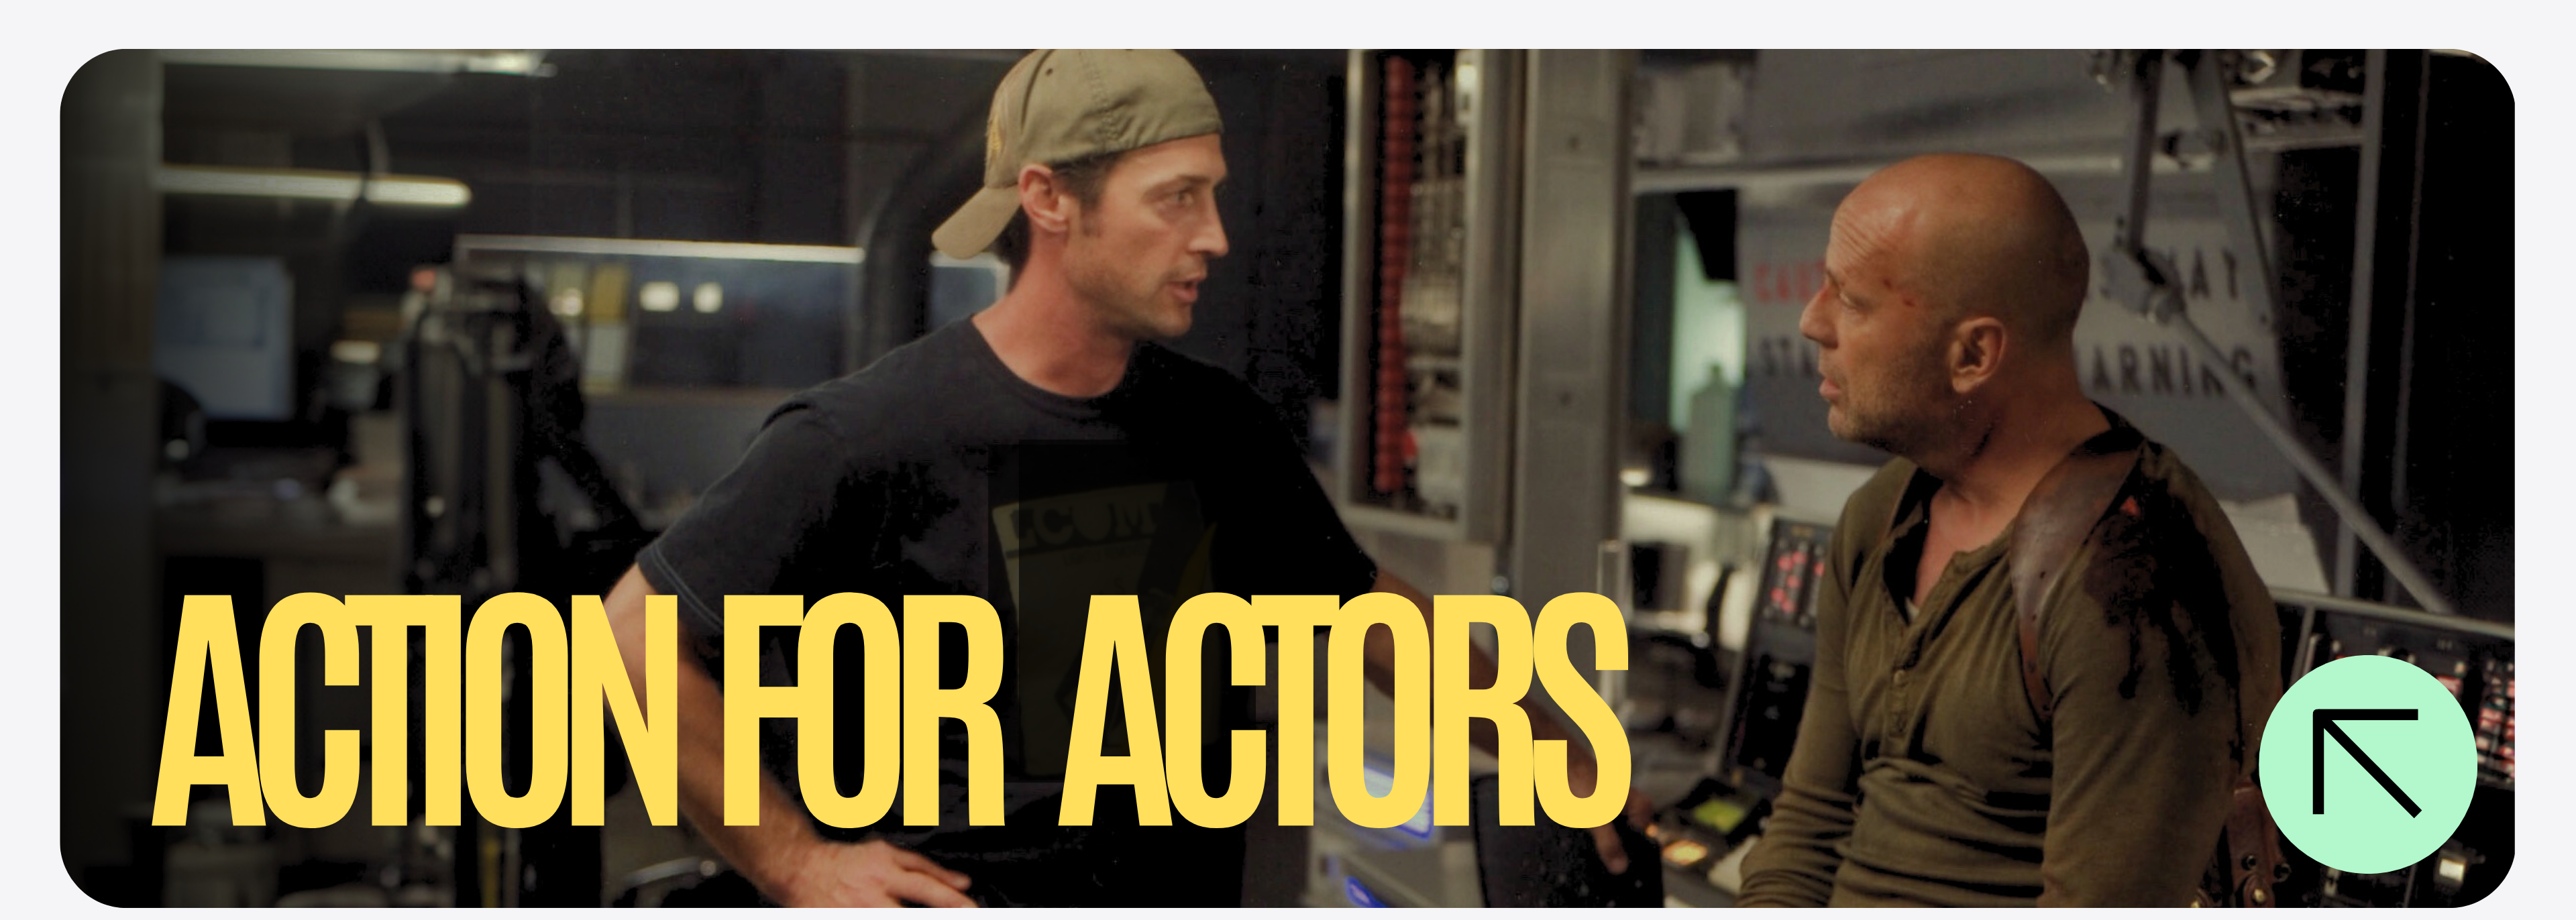 Action for actors